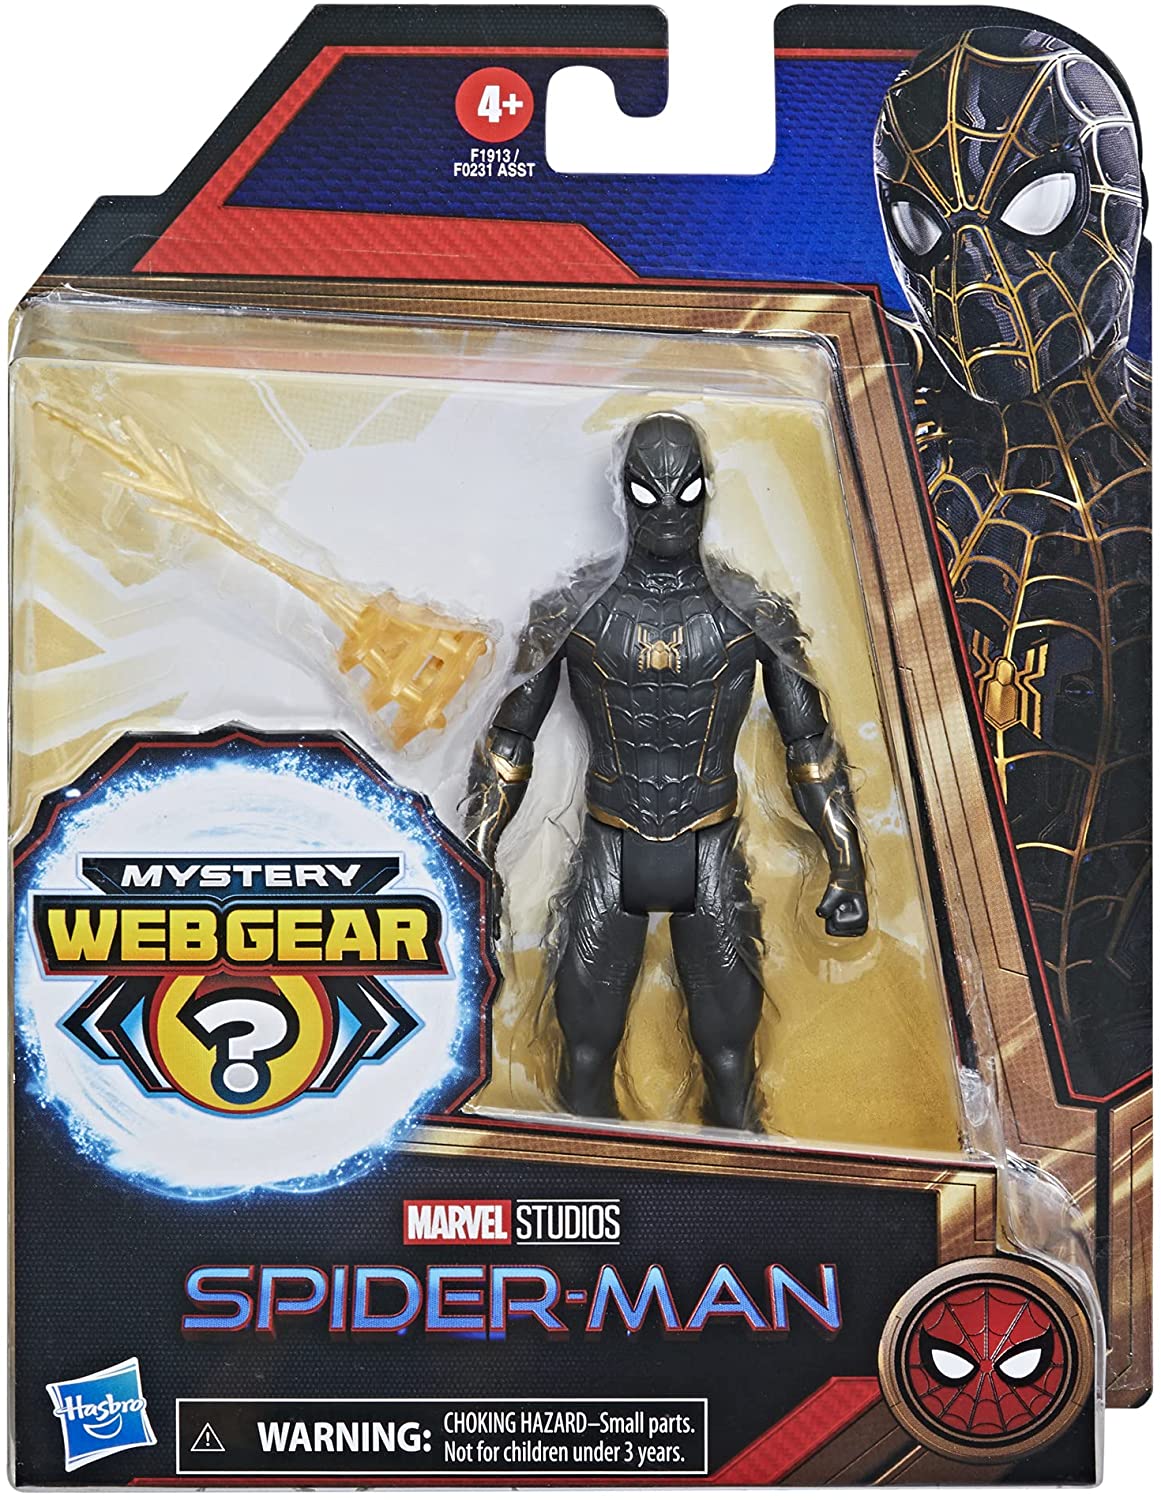 Spider-Man No Way Home Action Figures Assortment, 6 inches